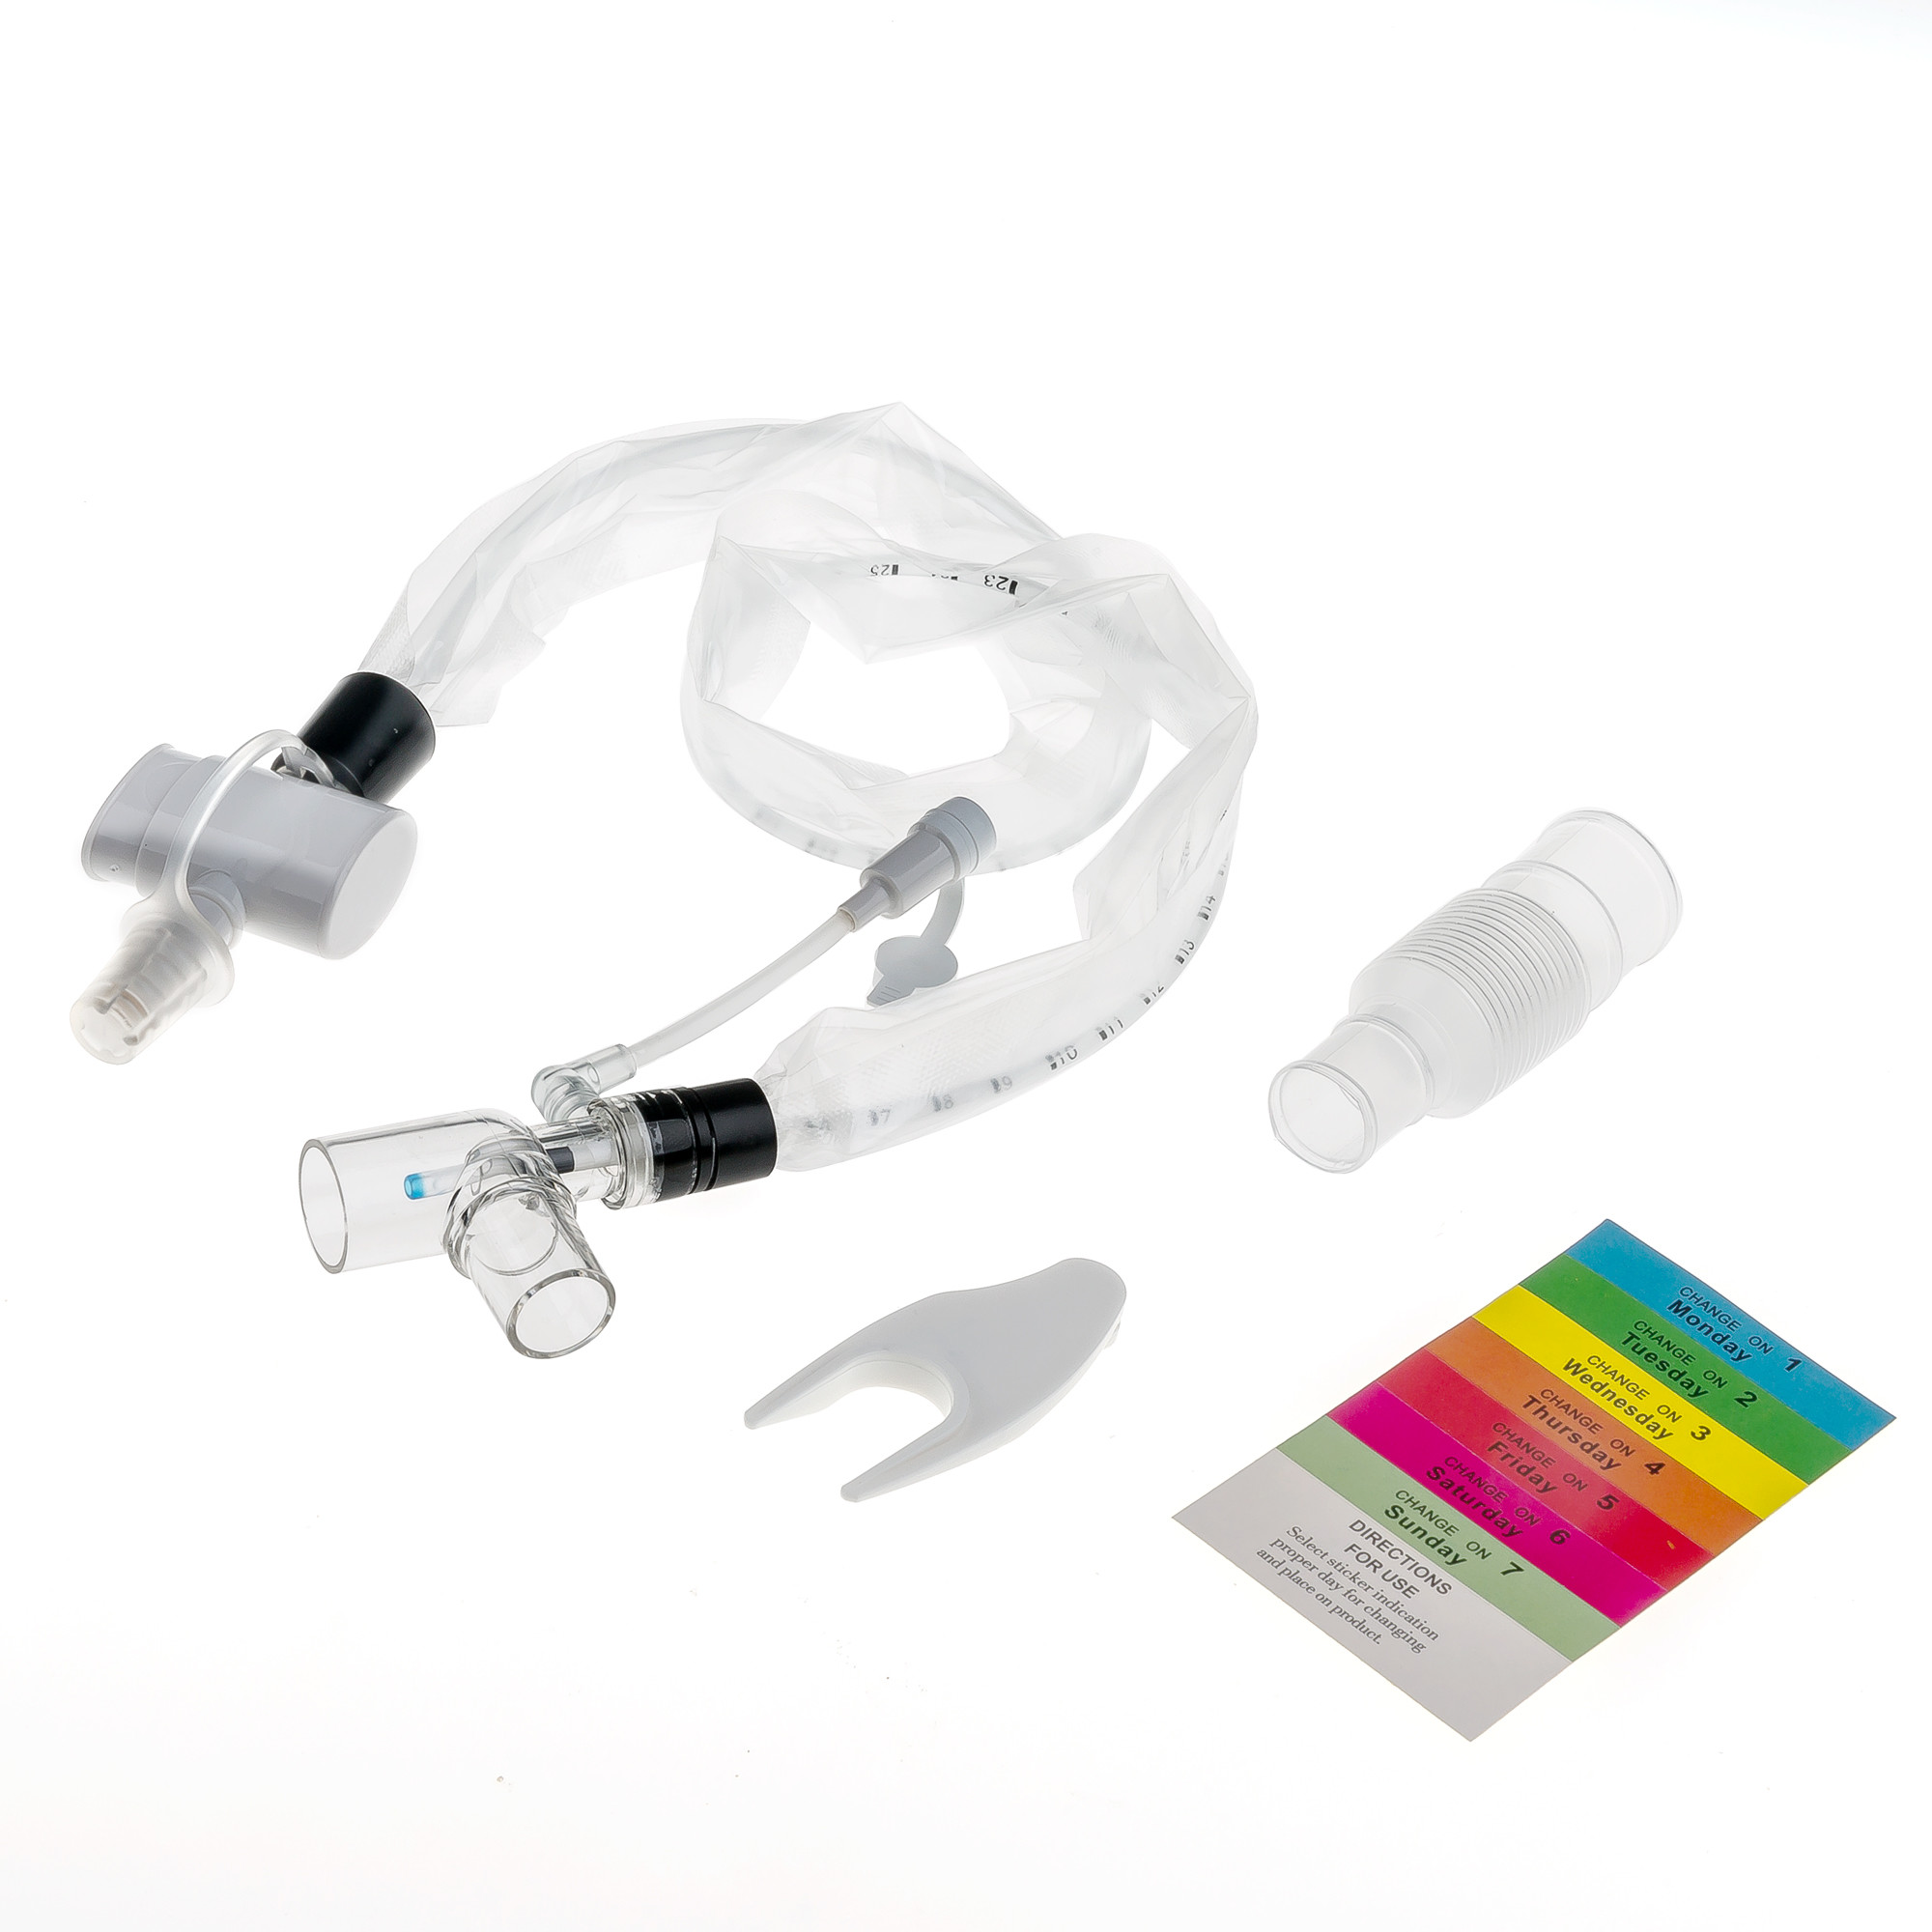  Endotracheal 600mm Closed System Suction Catheter 10Fr Simple Design Manufactures